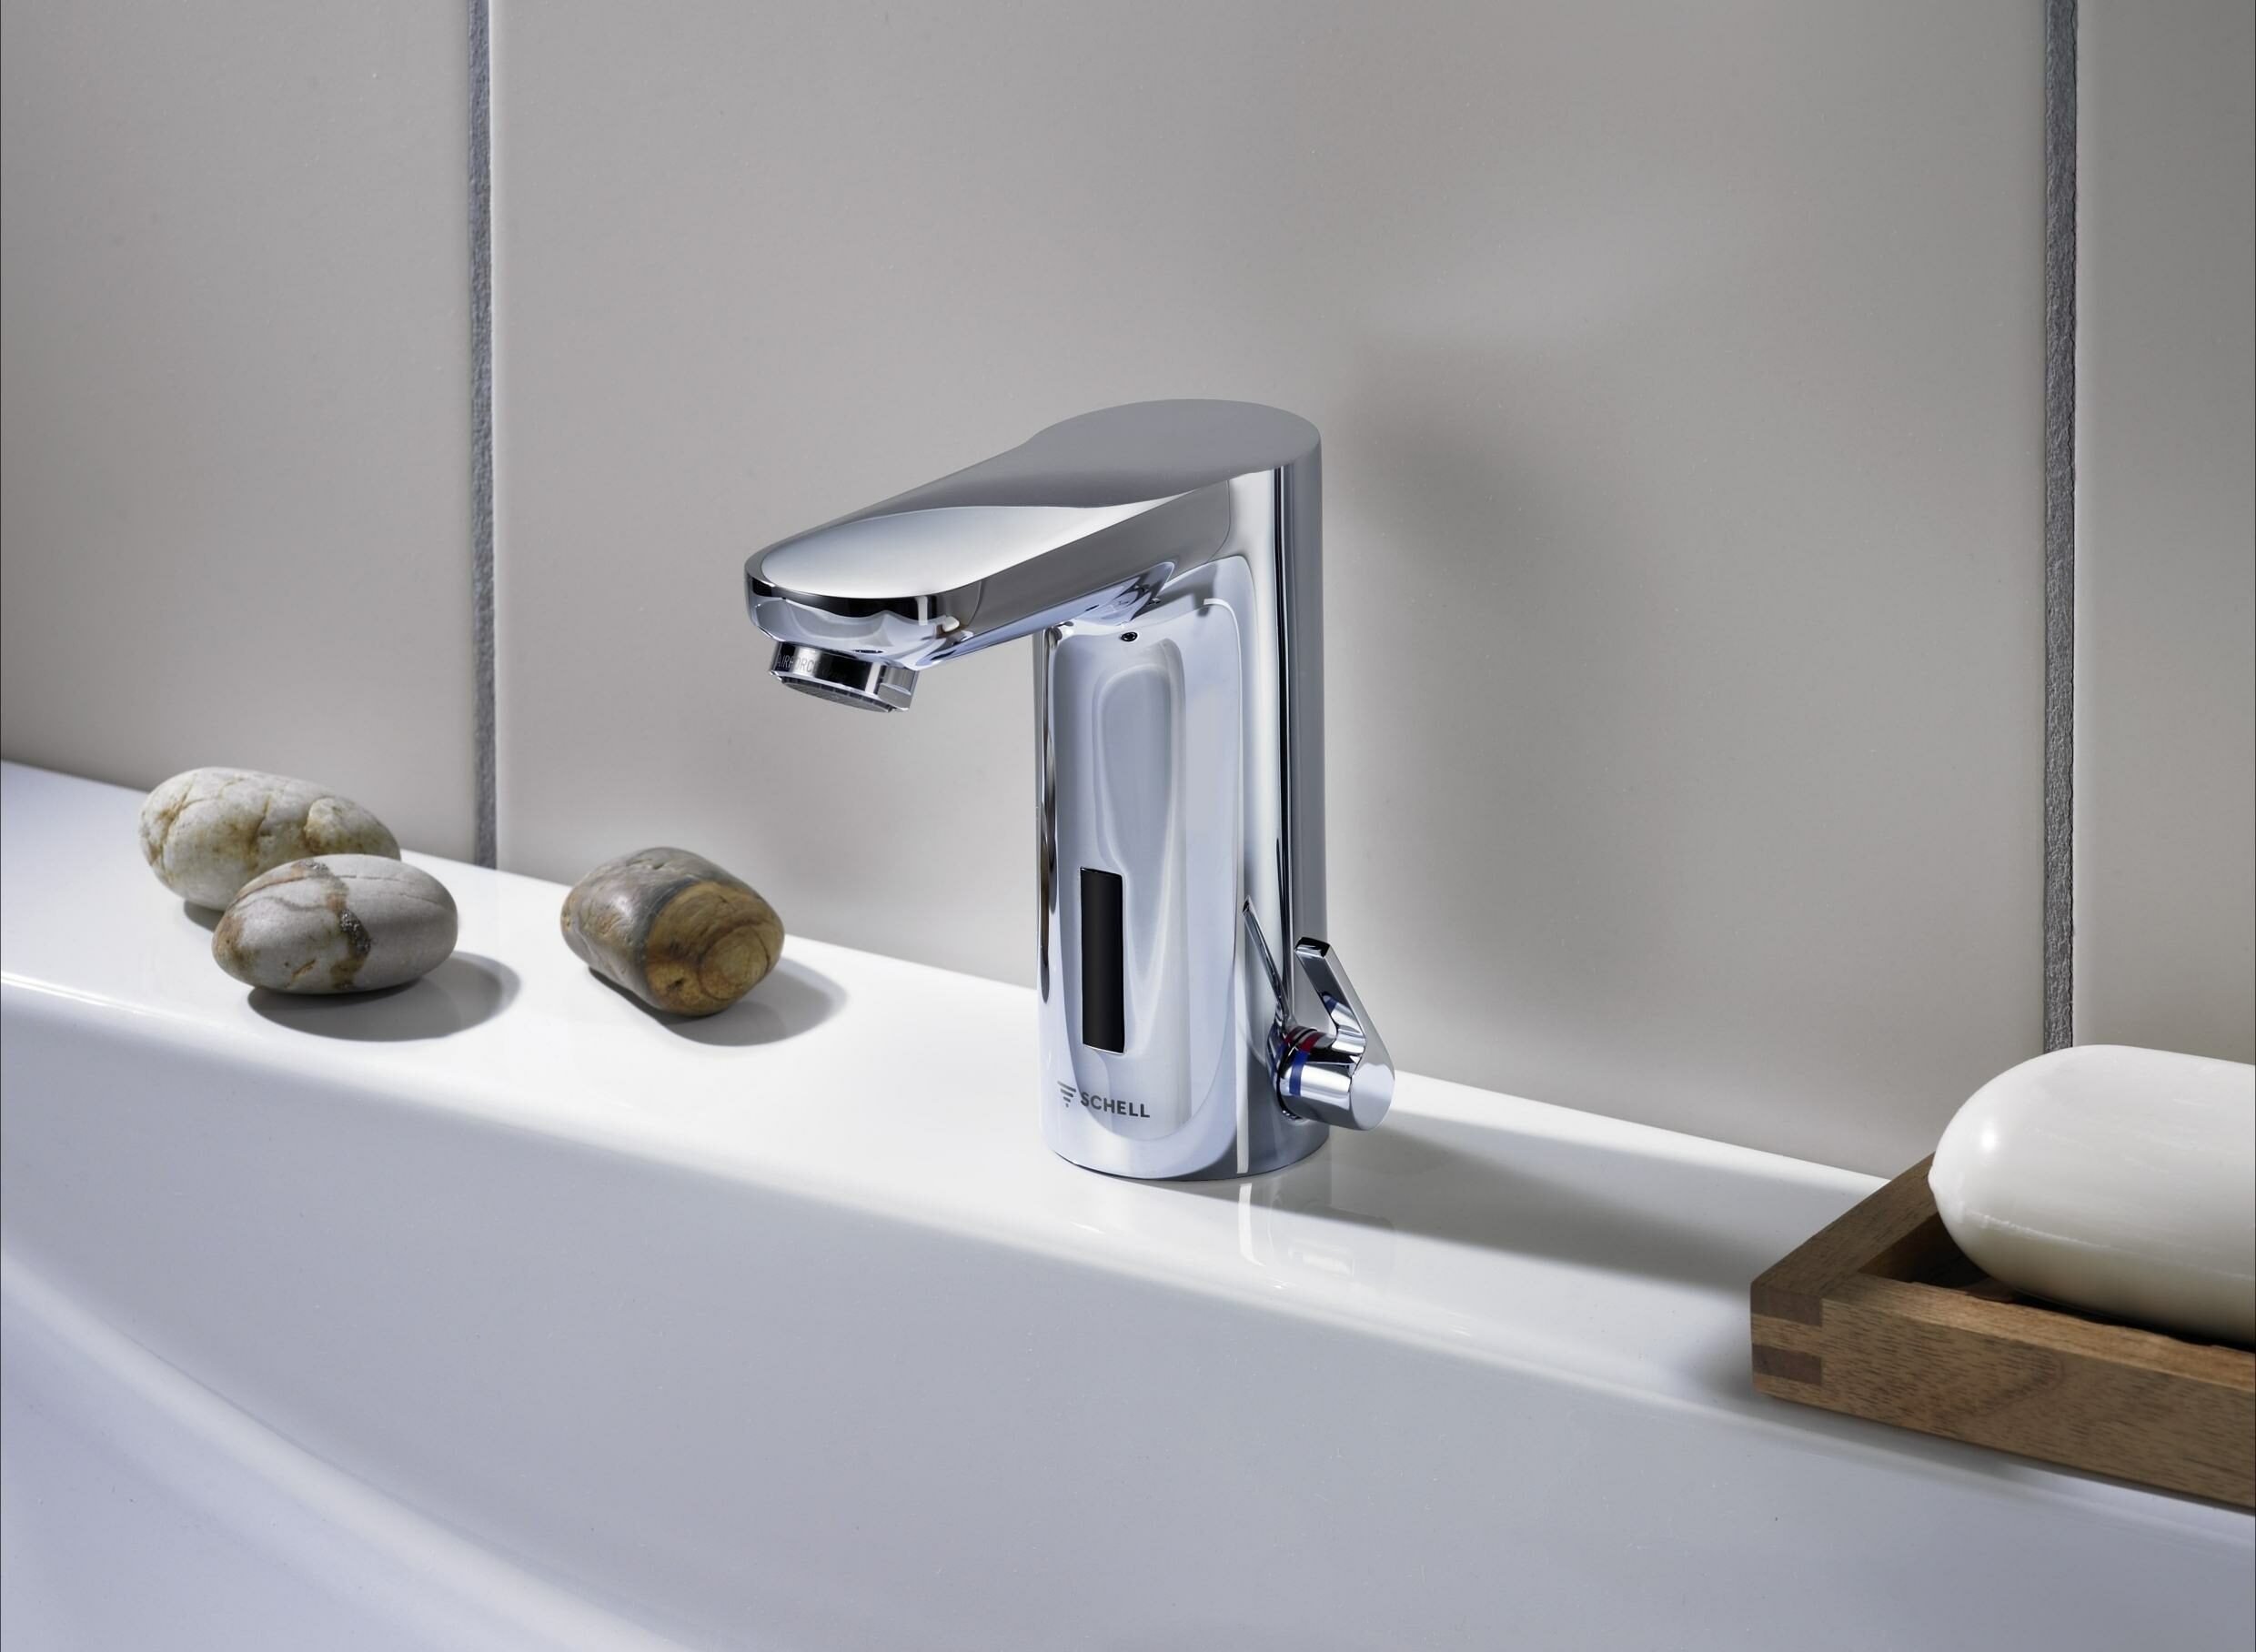 schell leed certified product, electronic sensor fittings, touchless washbasin faucet, energy efficient sustainable bath fittings